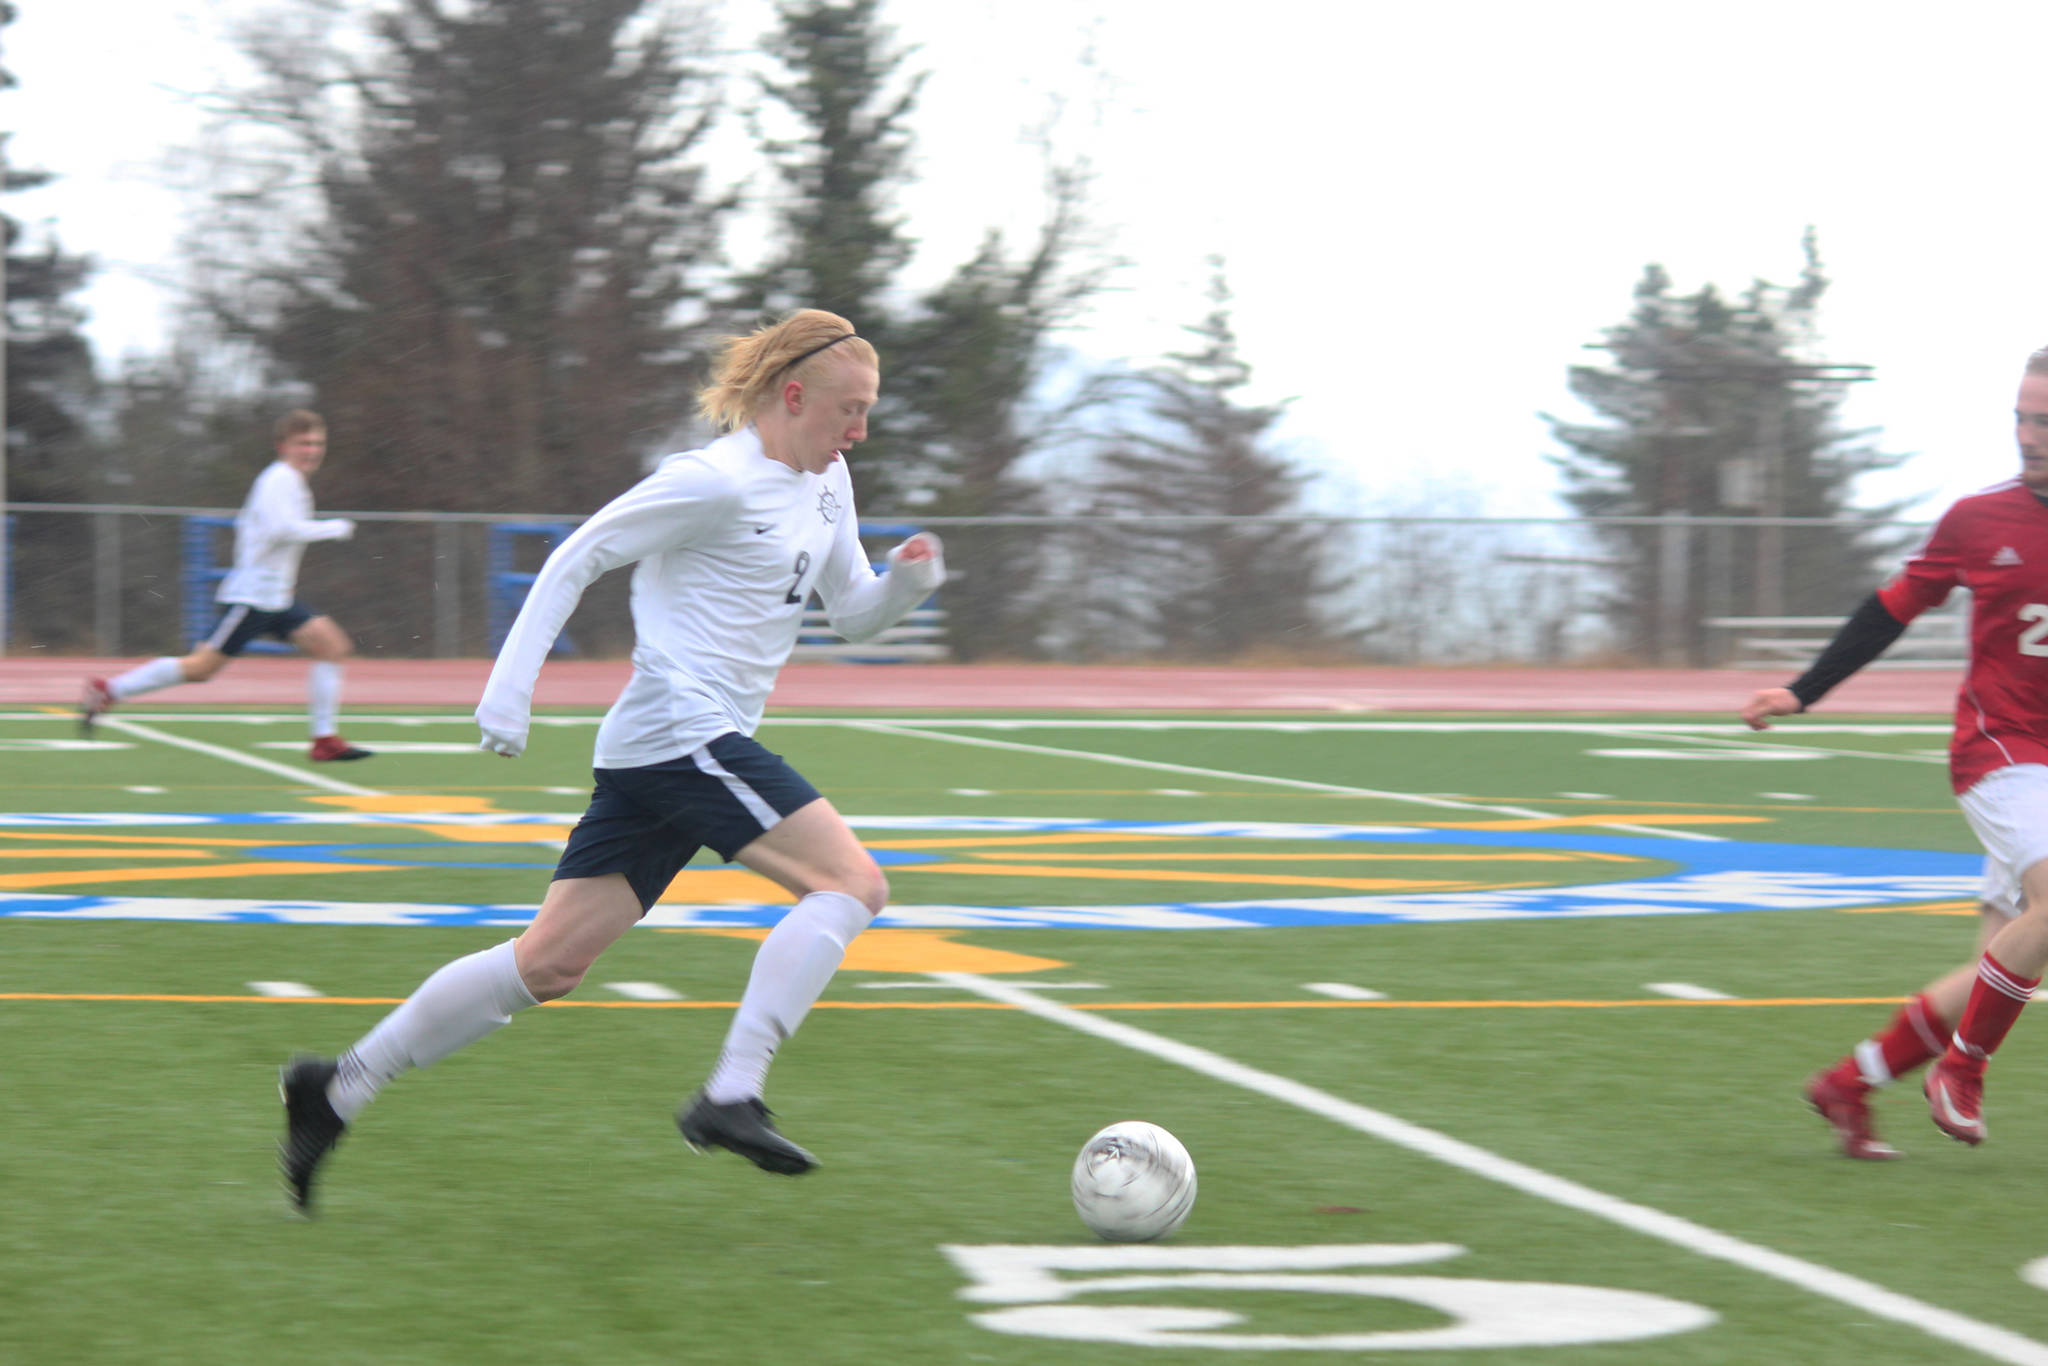 Homer senior Charles Rohr charges down the field with the ball during Homer High School’s game against Kenai Central High School on Tuesday, April 24, 2018 in Homer, Alaska. The Kardinals beat the Mariners 6-2. (Photo by Megan Pacer/Homer News)